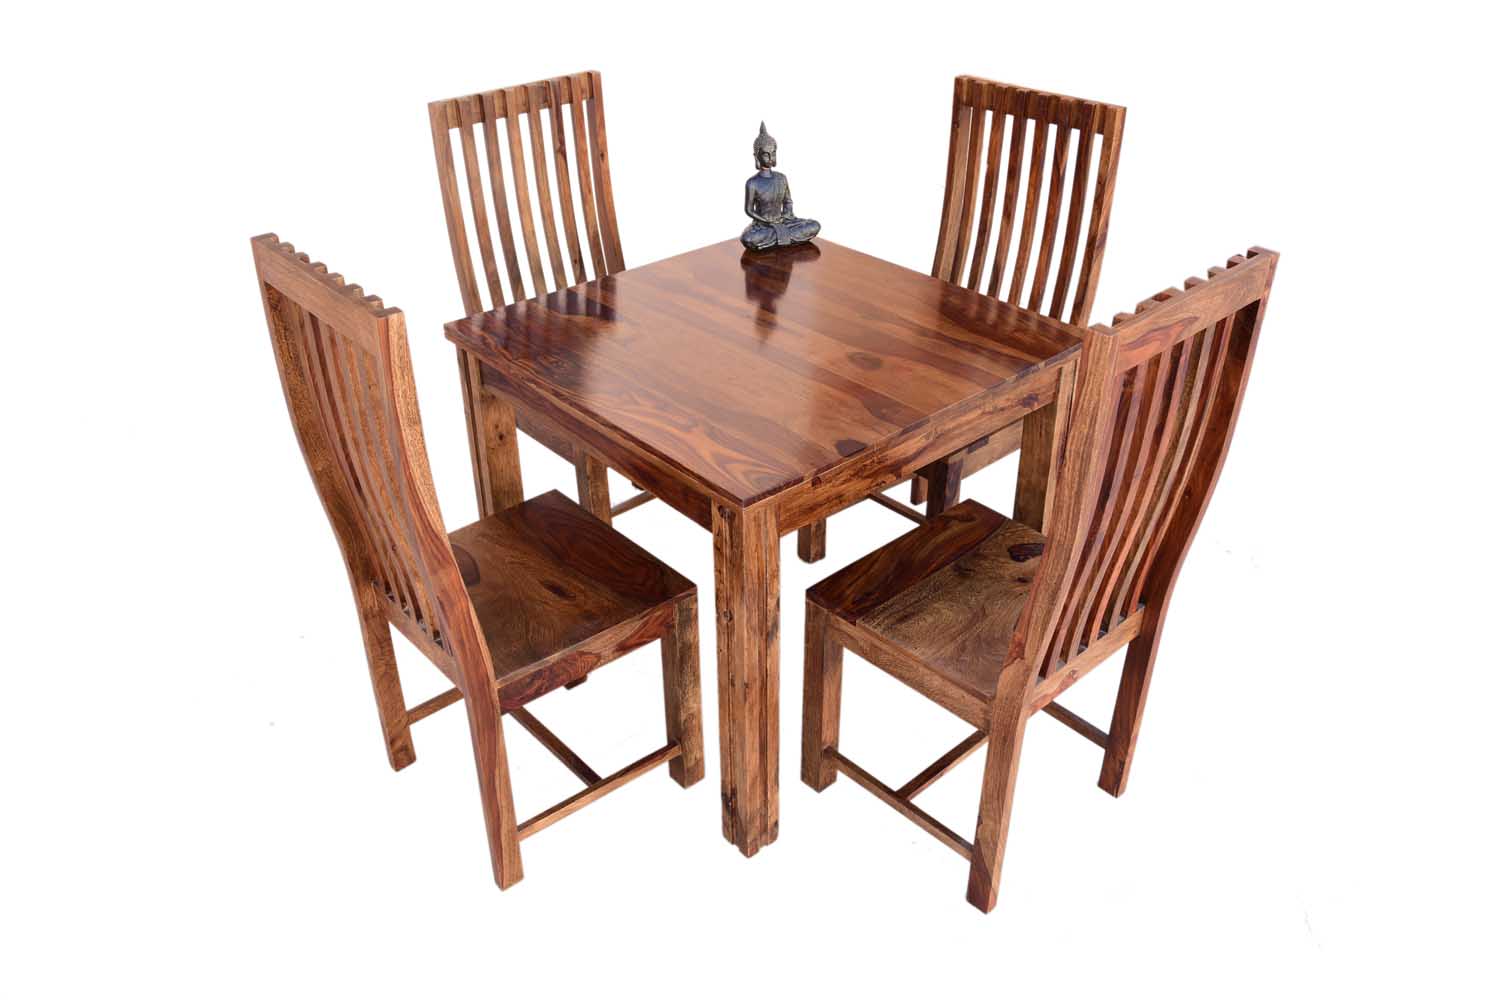 4 Seater Dining Room Table And Chairs